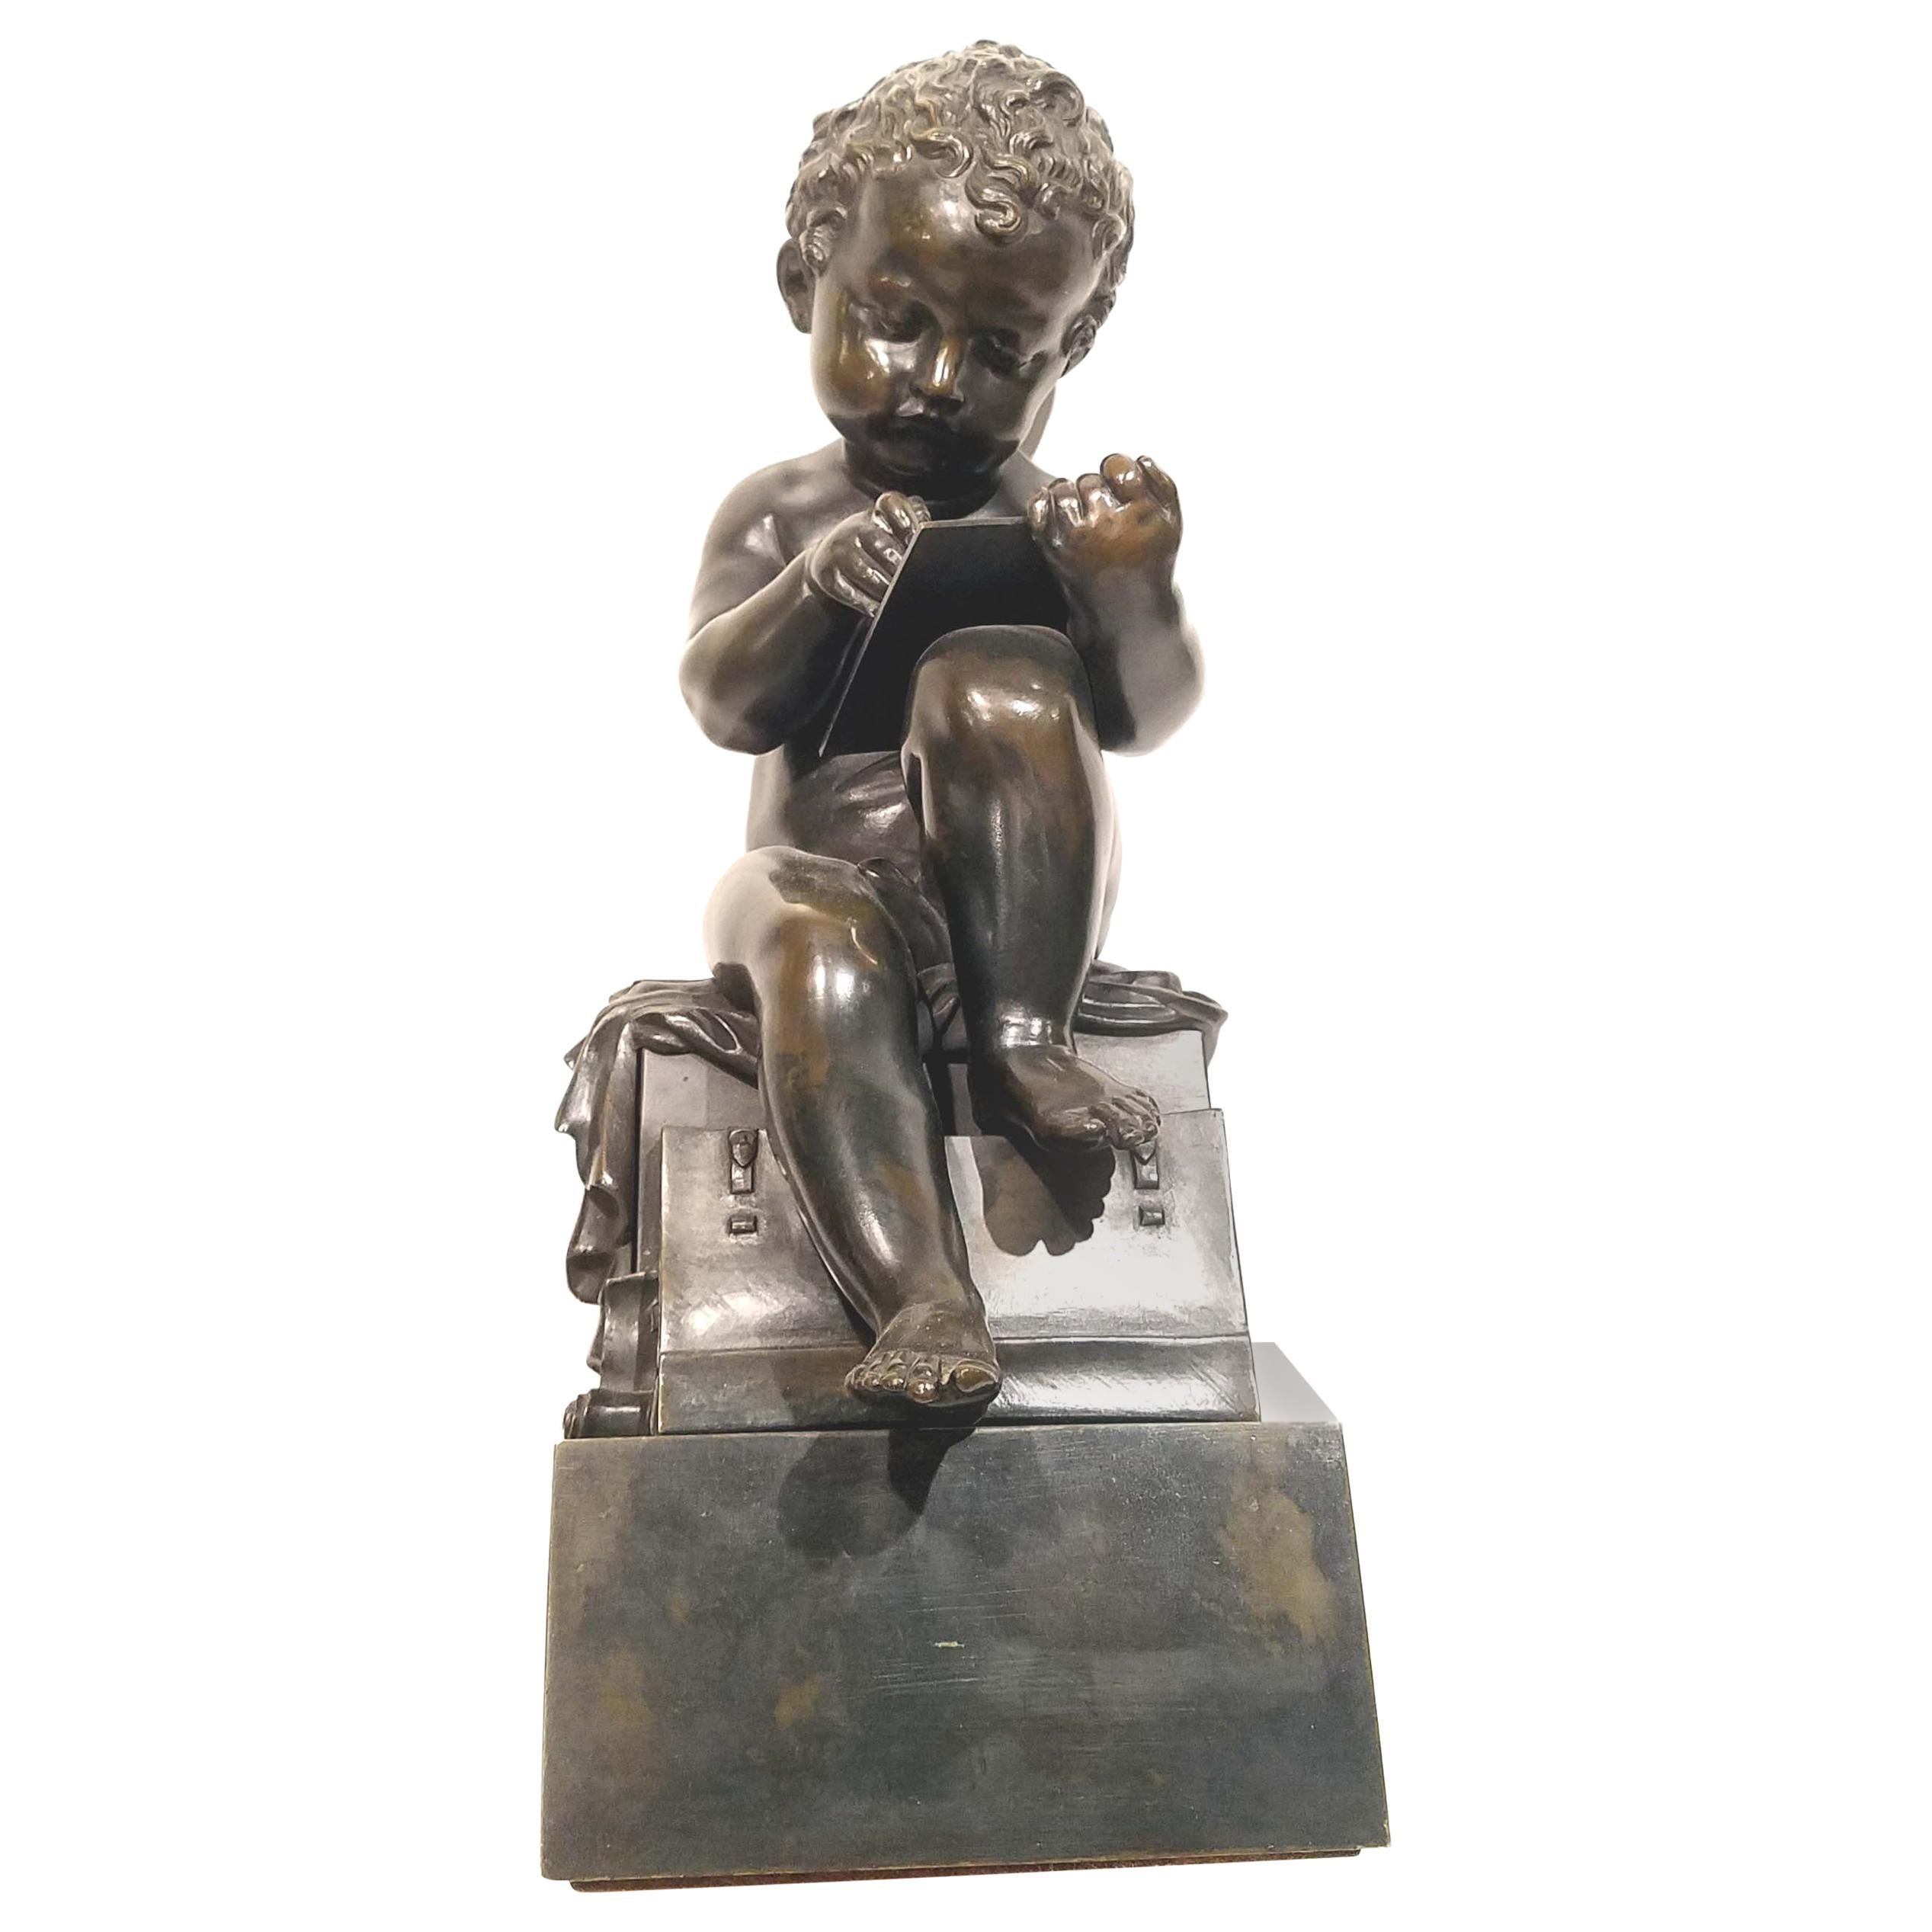 Antique Grand Tour Bronze of a Cherub Writing on a Tablet